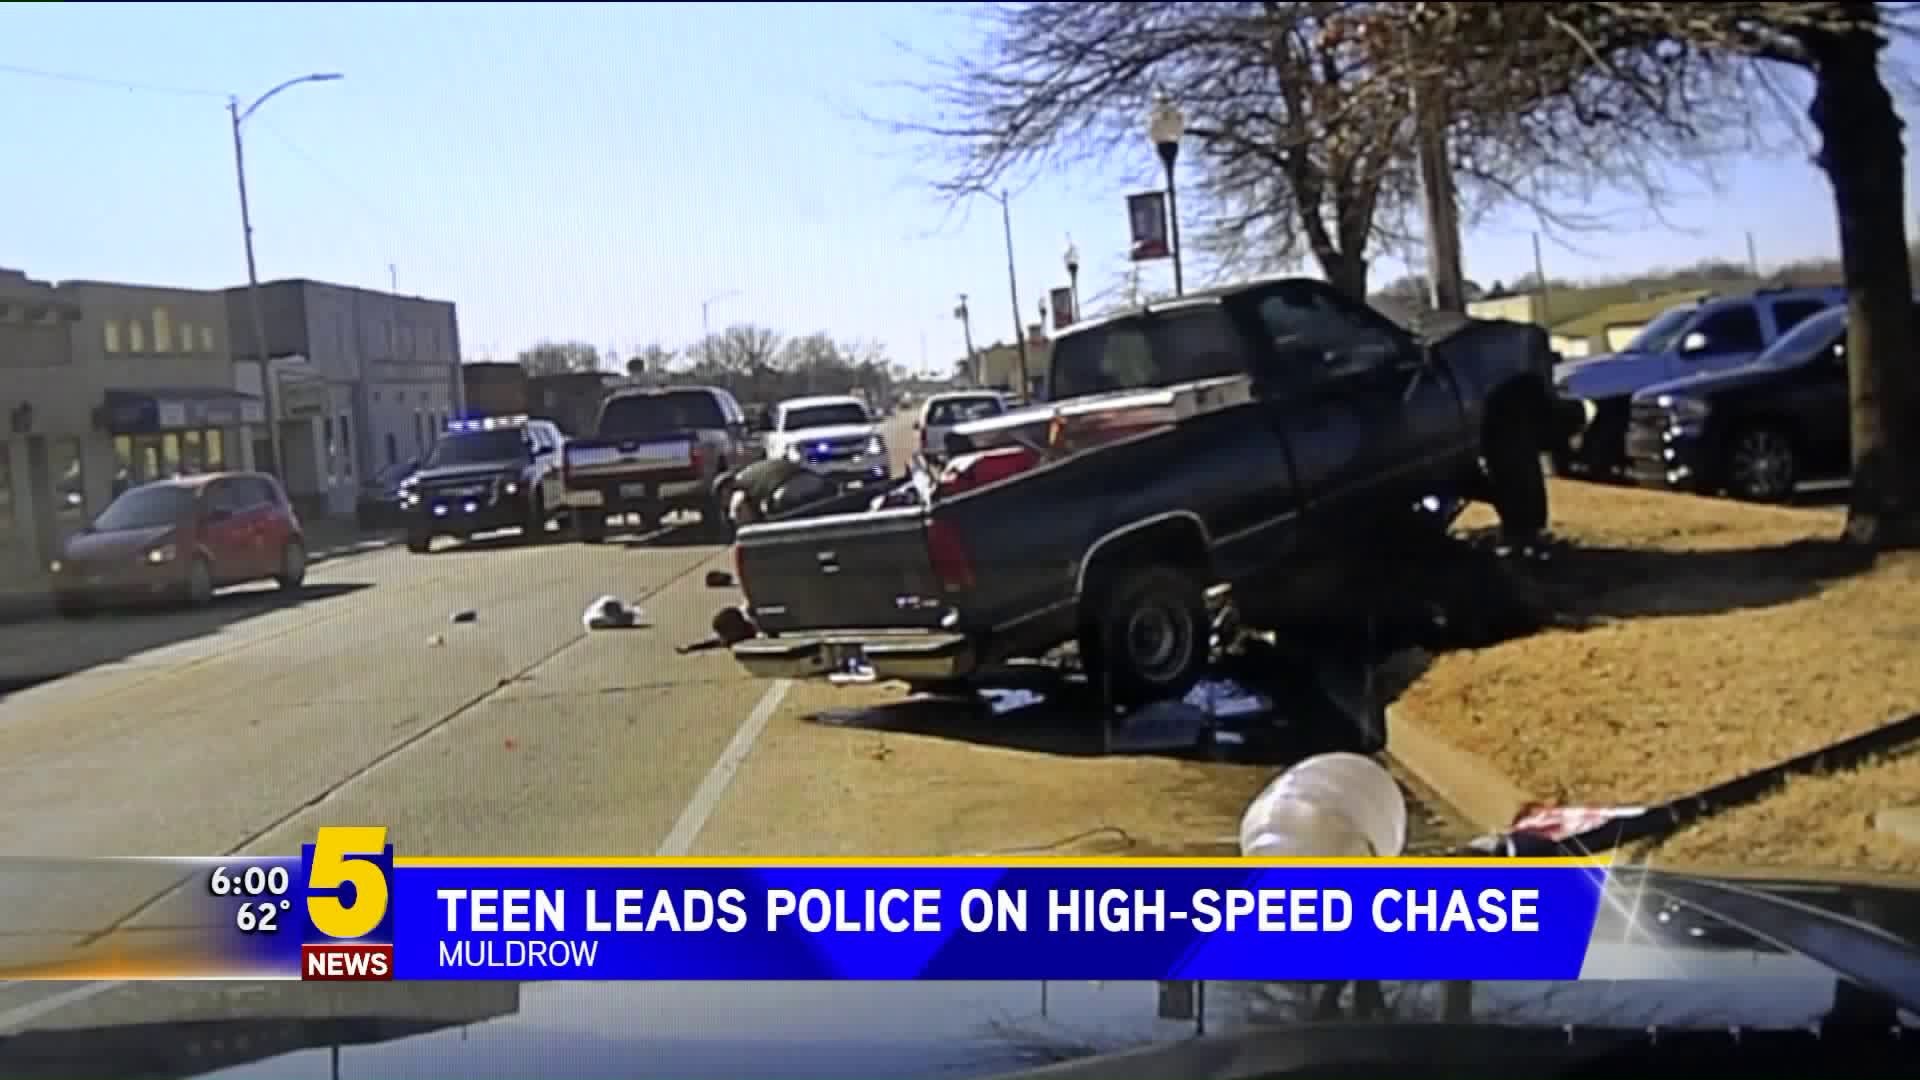 Teen Leads Police On High-Speed Chase